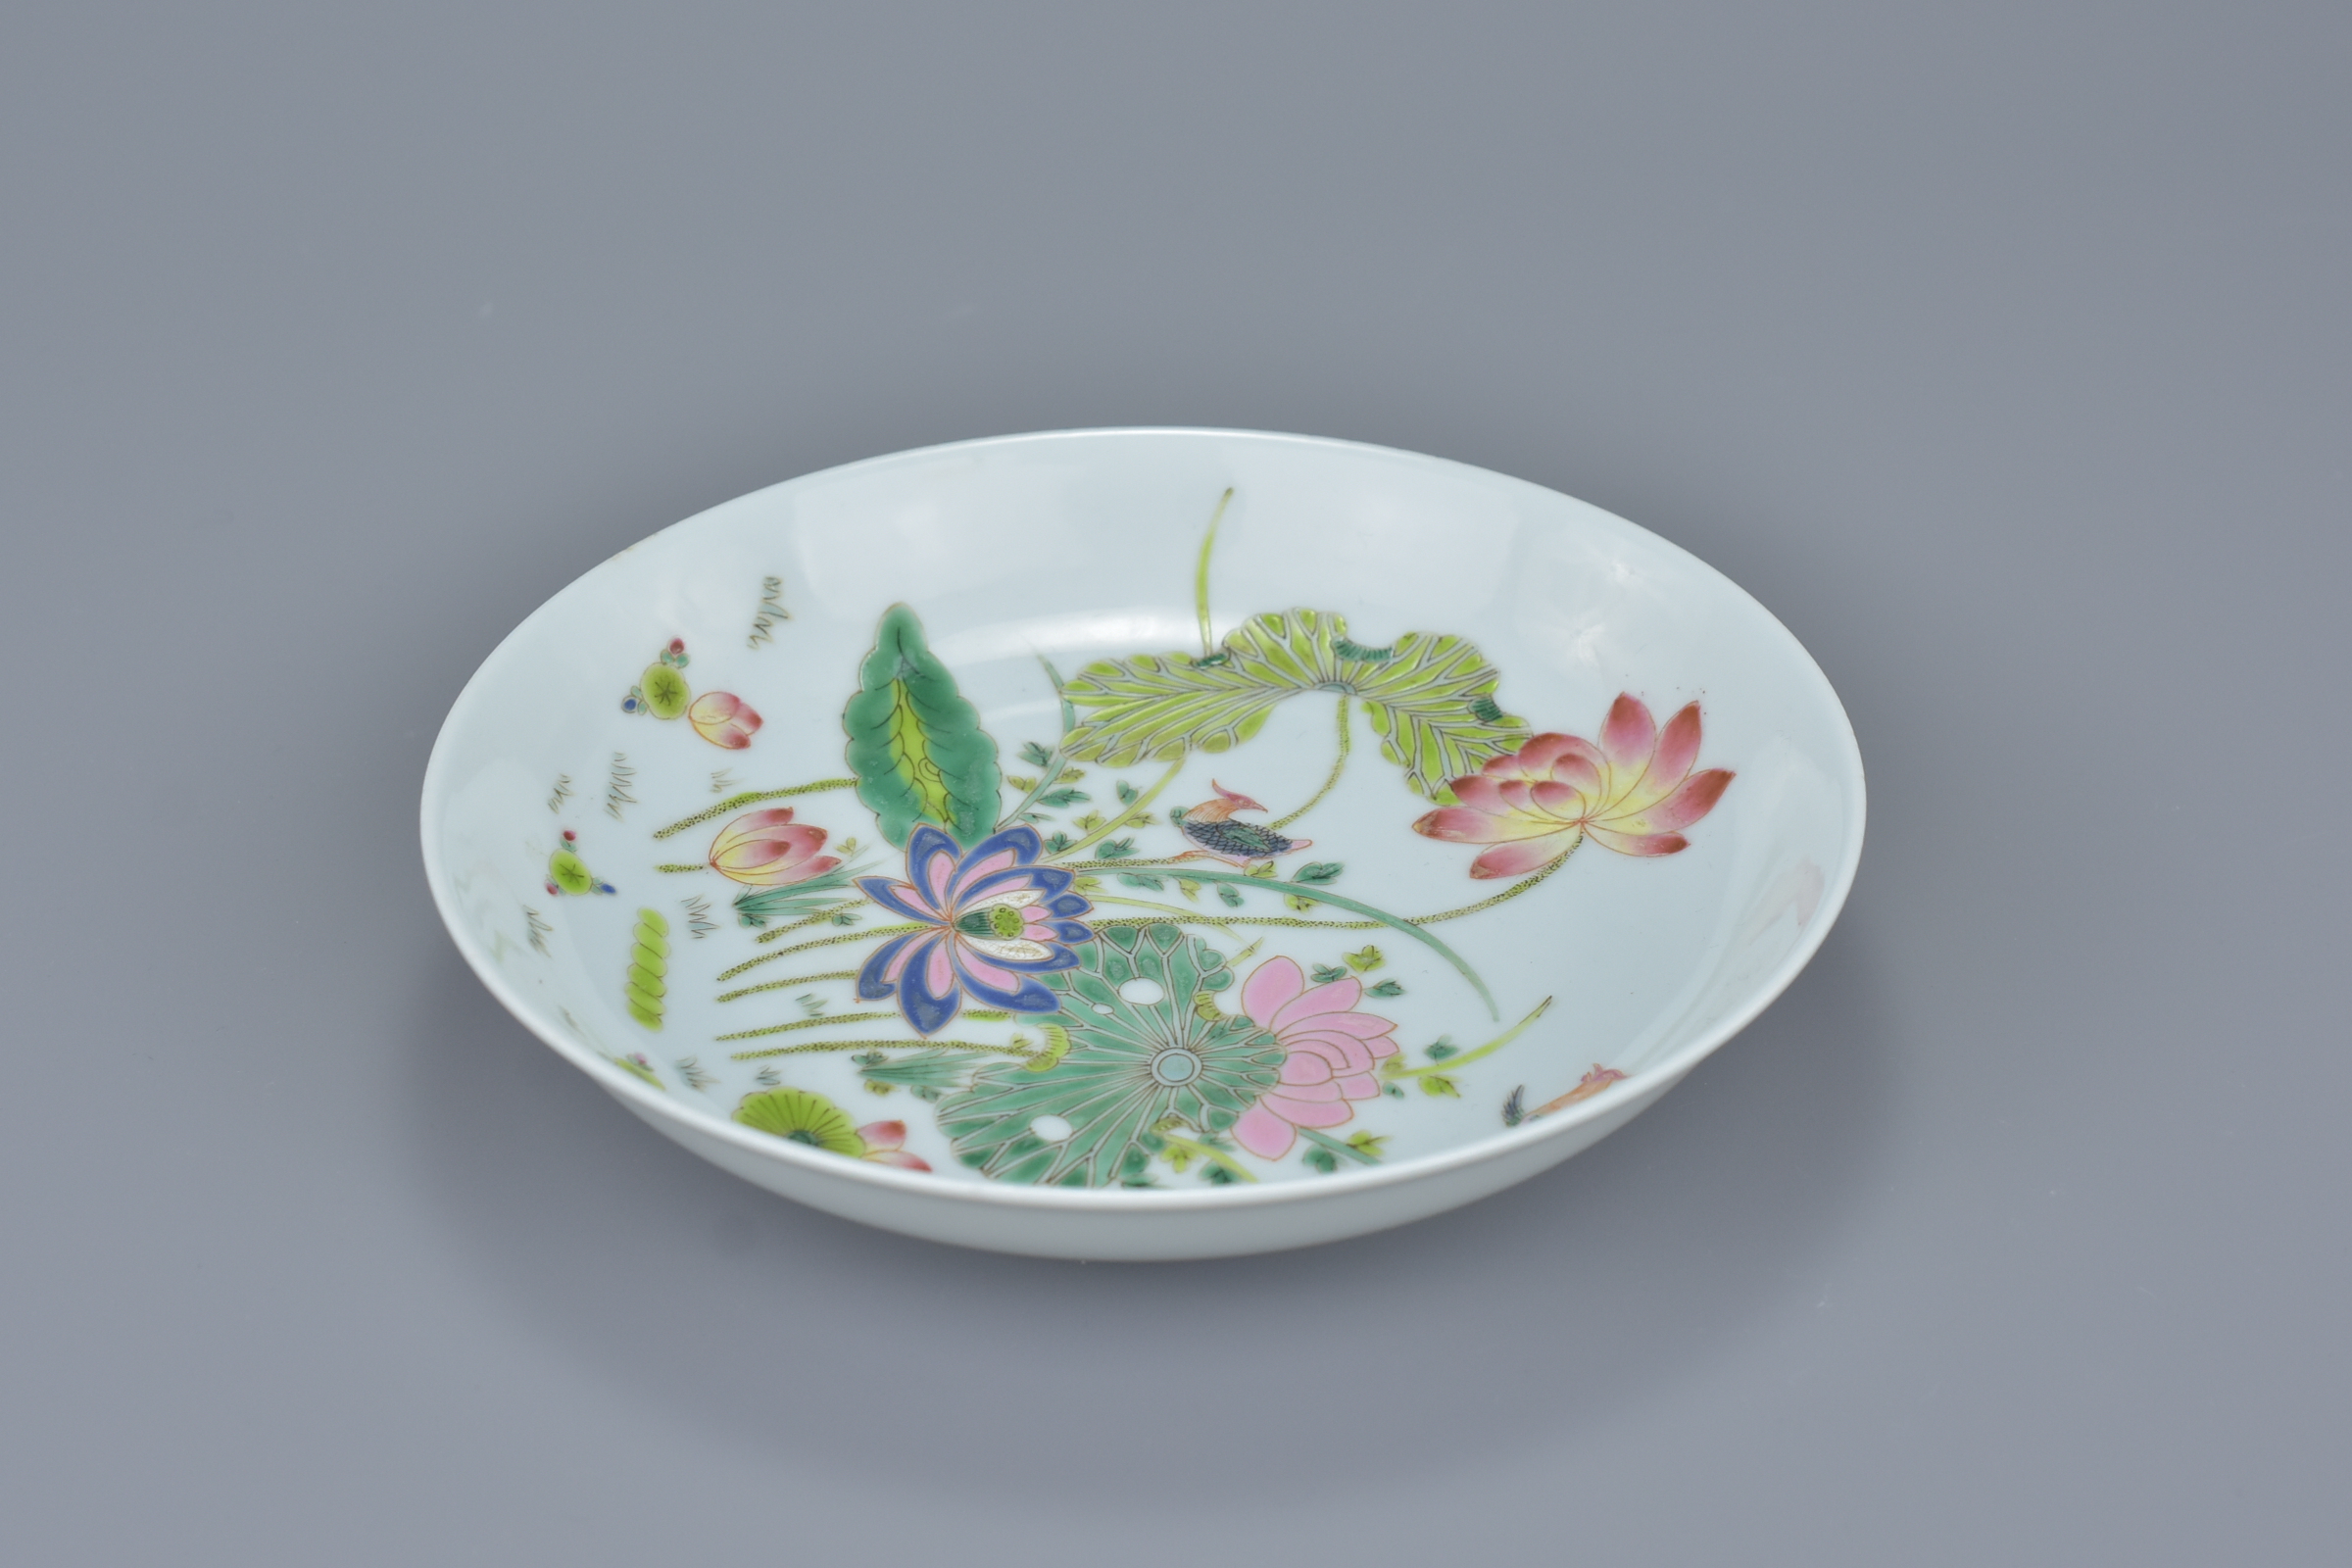 A Chinese 19/20th century Famille rose porcelain dish with florals and bird design. Six-character ma - Image 7 of 7